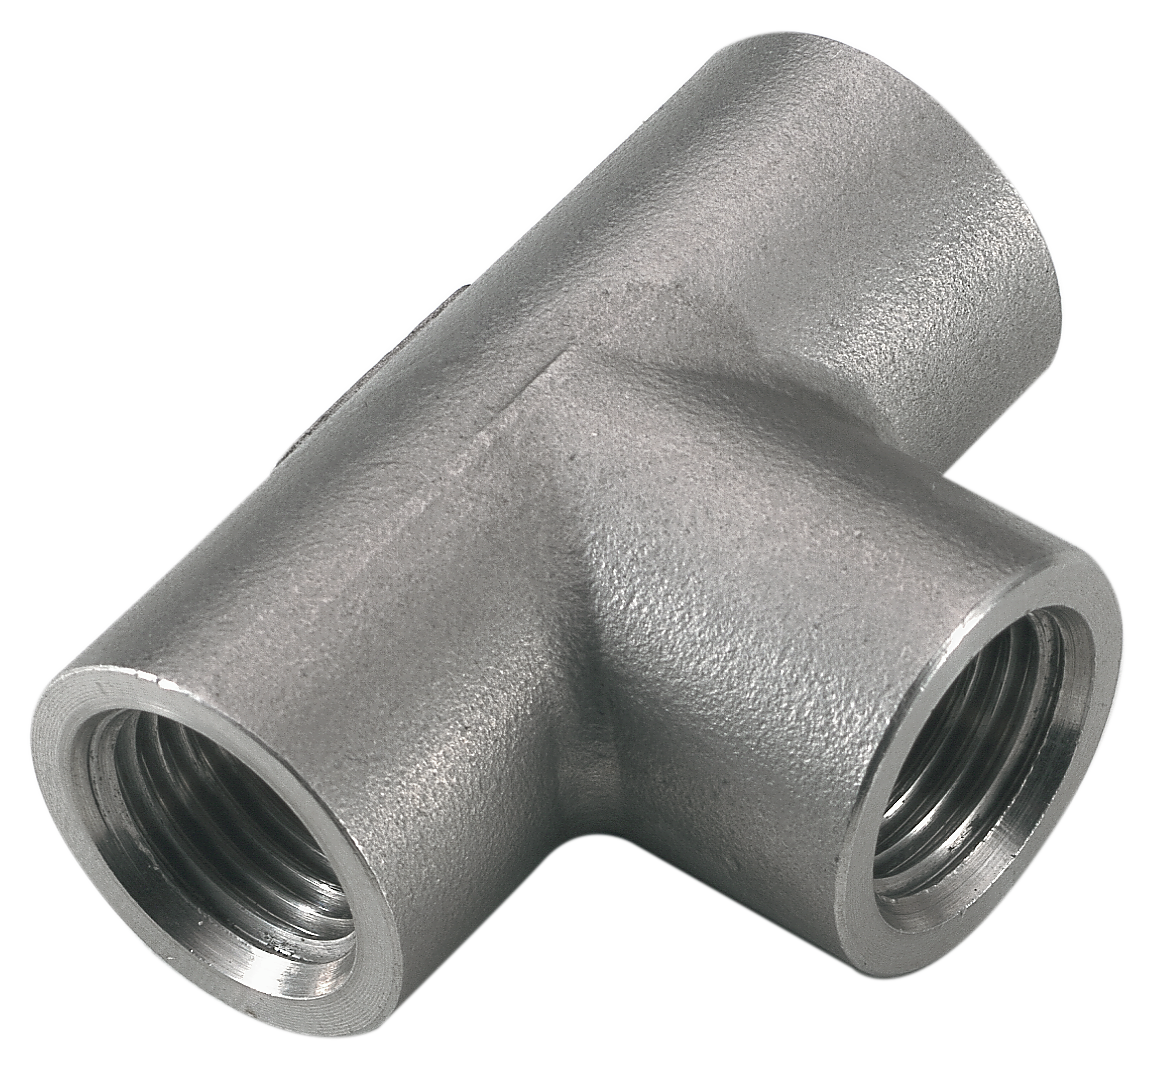 T equal female cylindrical stainless steel AISI 316Ti 1/2 Standard fittings in stainless steel